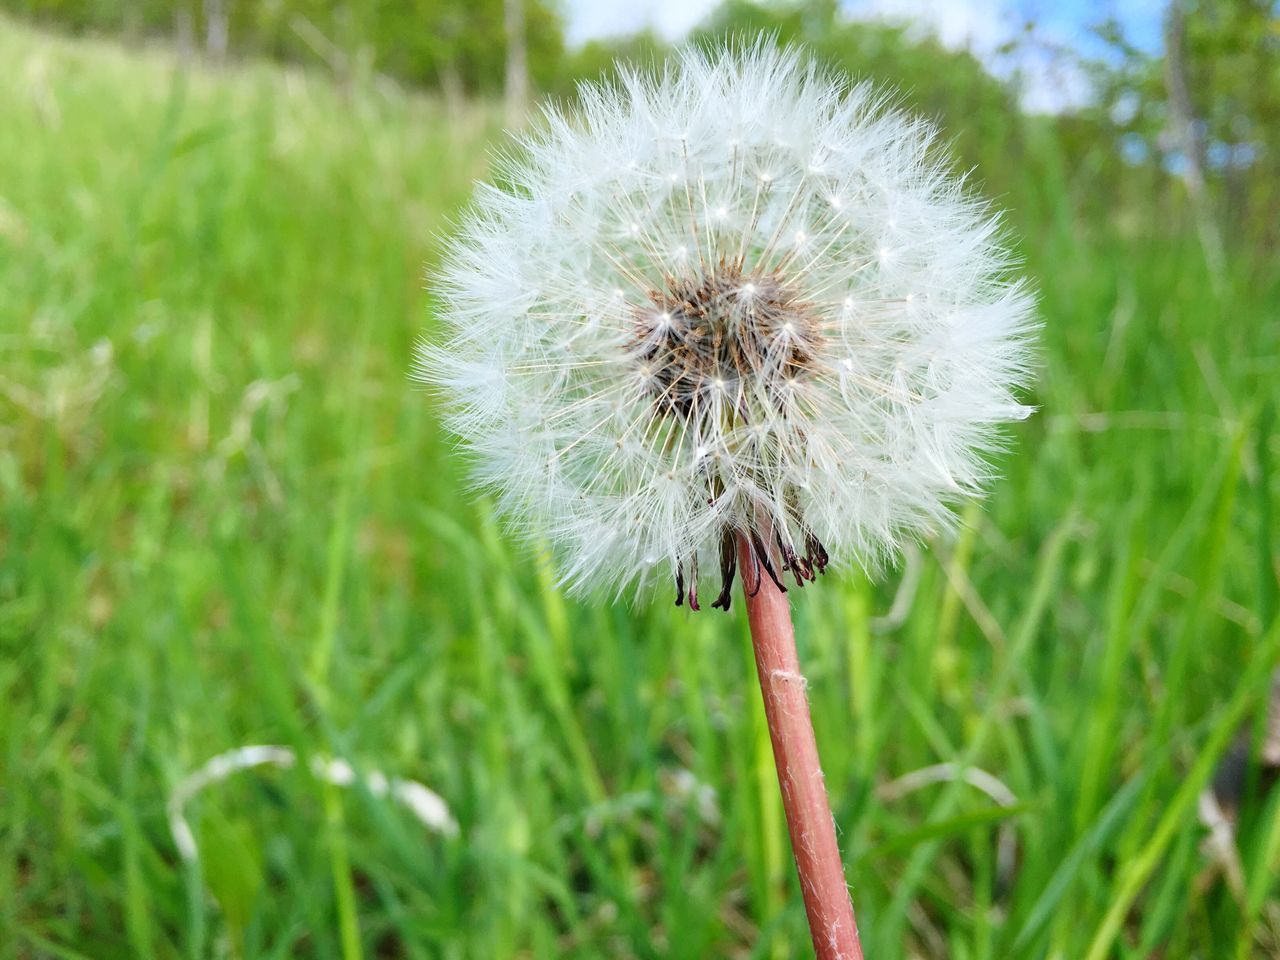 dandelion, flower, fragility, freshness, close-up, growth, focus on foreground, single flower, seed, softness, stem, uncultivated, beauty in nature, springtime, flower head, plant, nature, wildflower, dandelion seed, grass, in bloom, blossom, season, simplicity, day, field, botany, green color, soft focus, focus, outdoors, no people, grassy